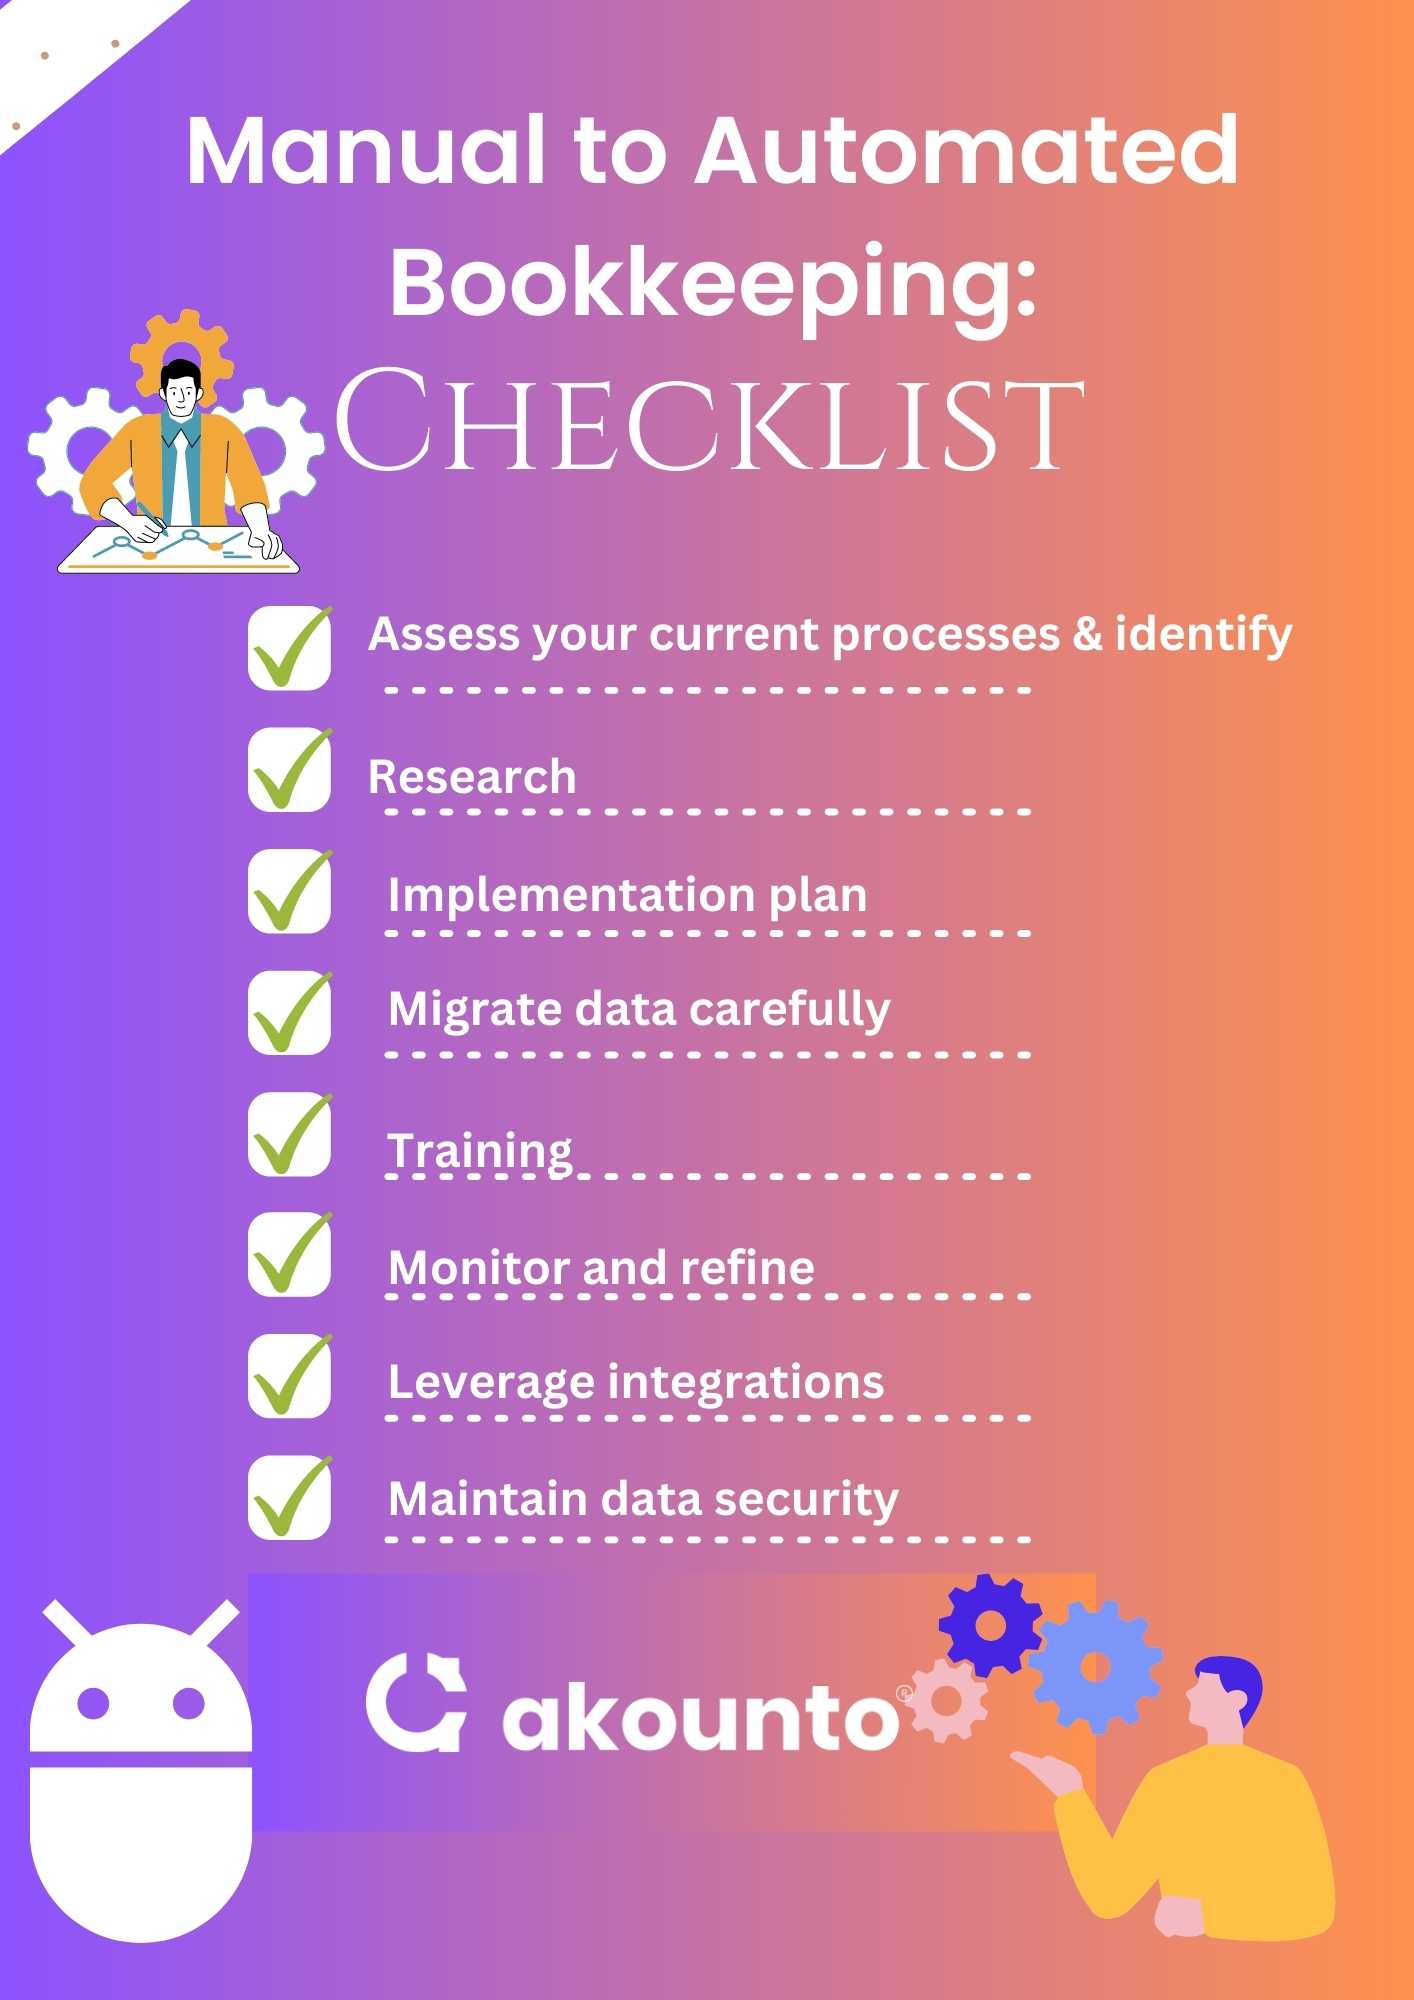 manual to automated bookkeeping checklist